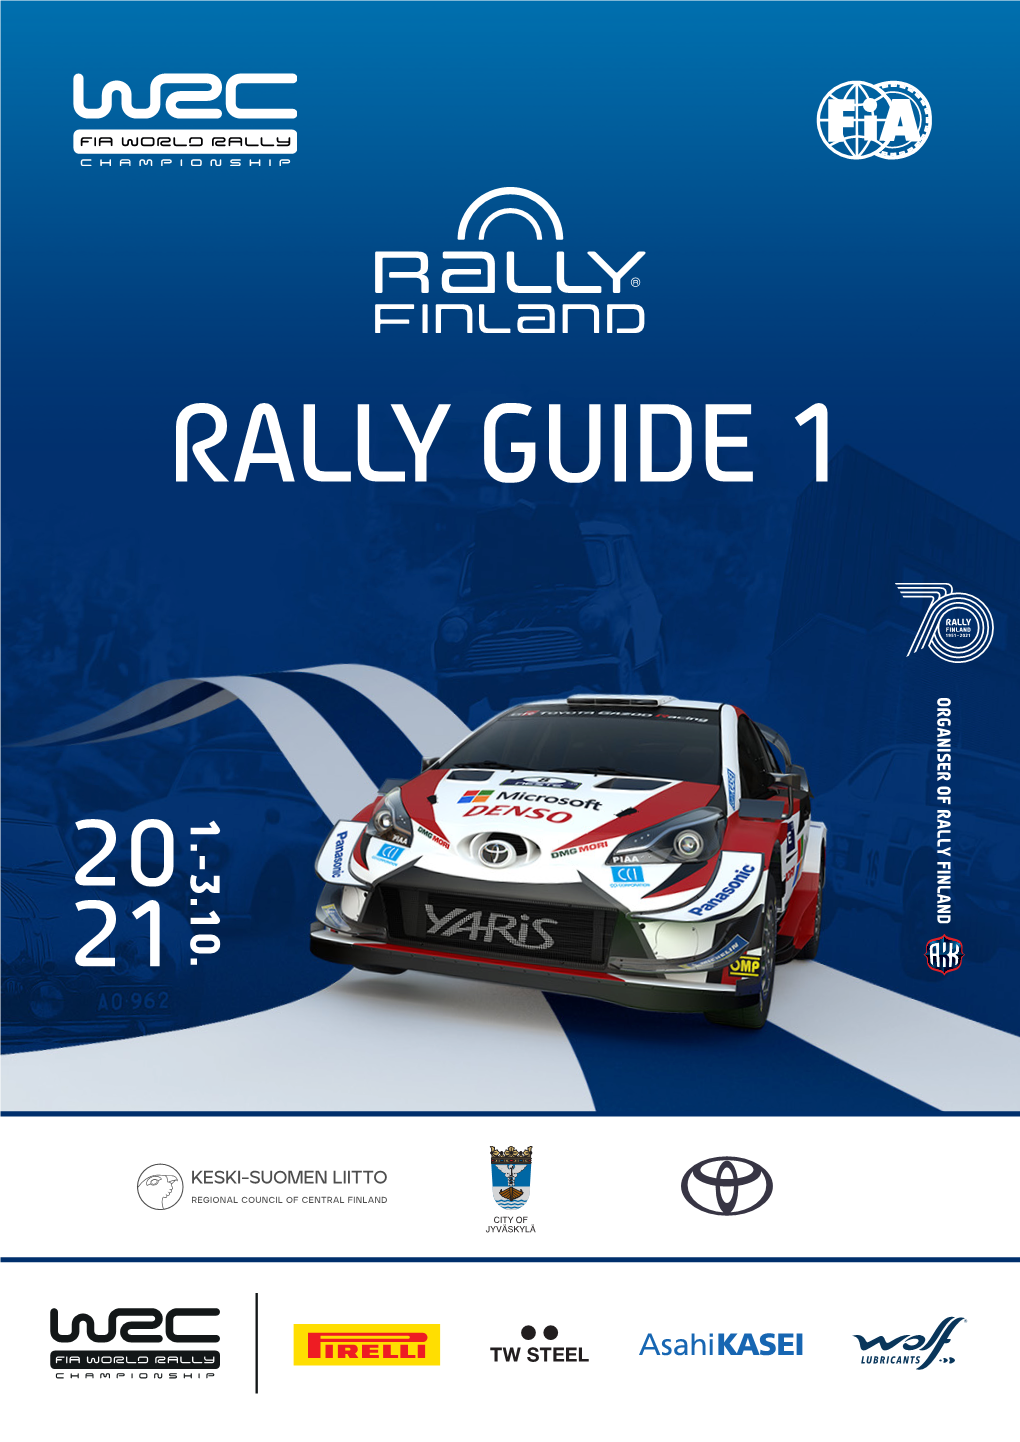 Rally Guide 1 - Contents